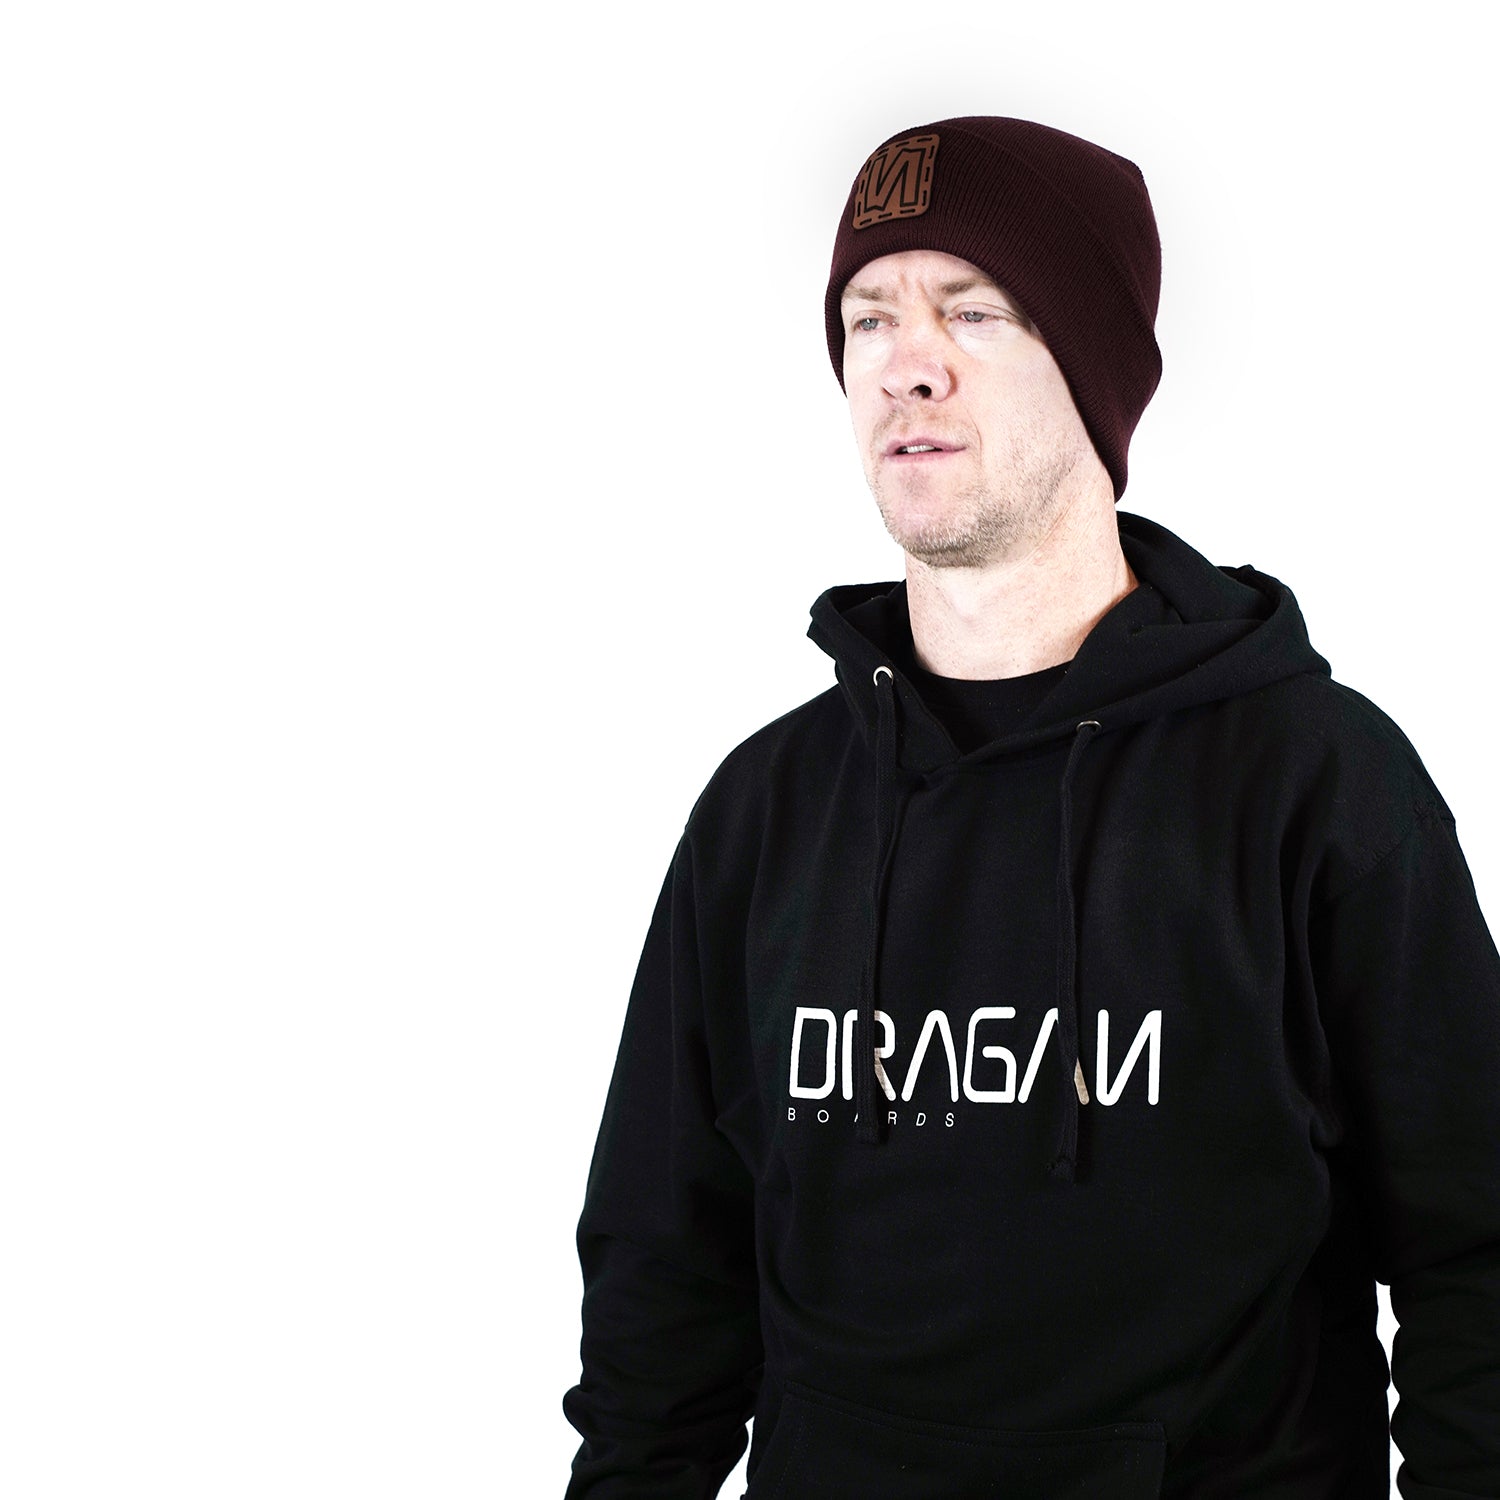 Brinton Gundersen wearing a black hoodie with a Dragan logo on it and a dark red beenie  on a white background